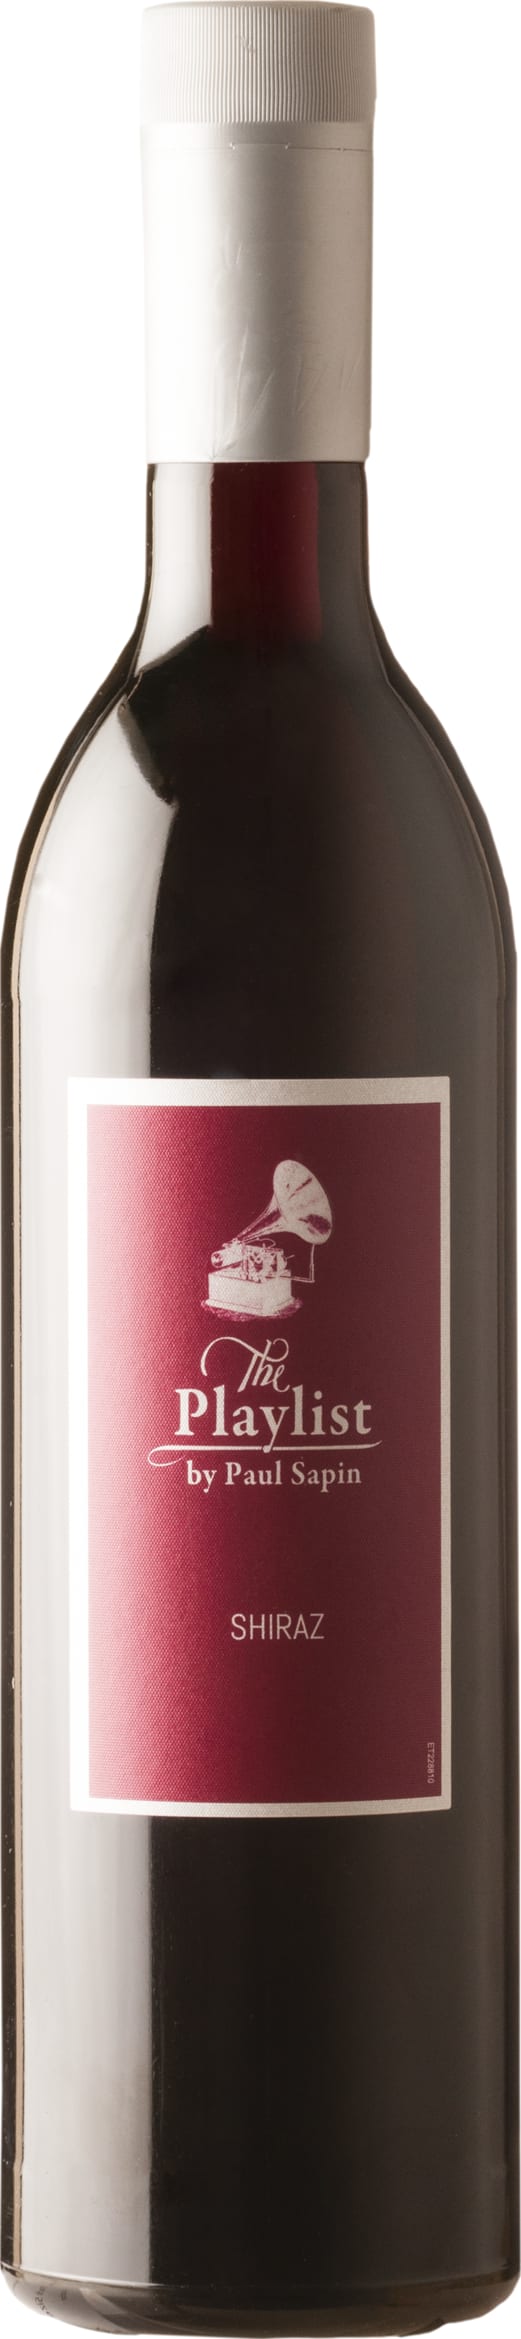 Shiraz PET NV Playlist 24/187 18.7cl NV - Buy Playlist Wines from GREAT WINES DIRECT wine shop